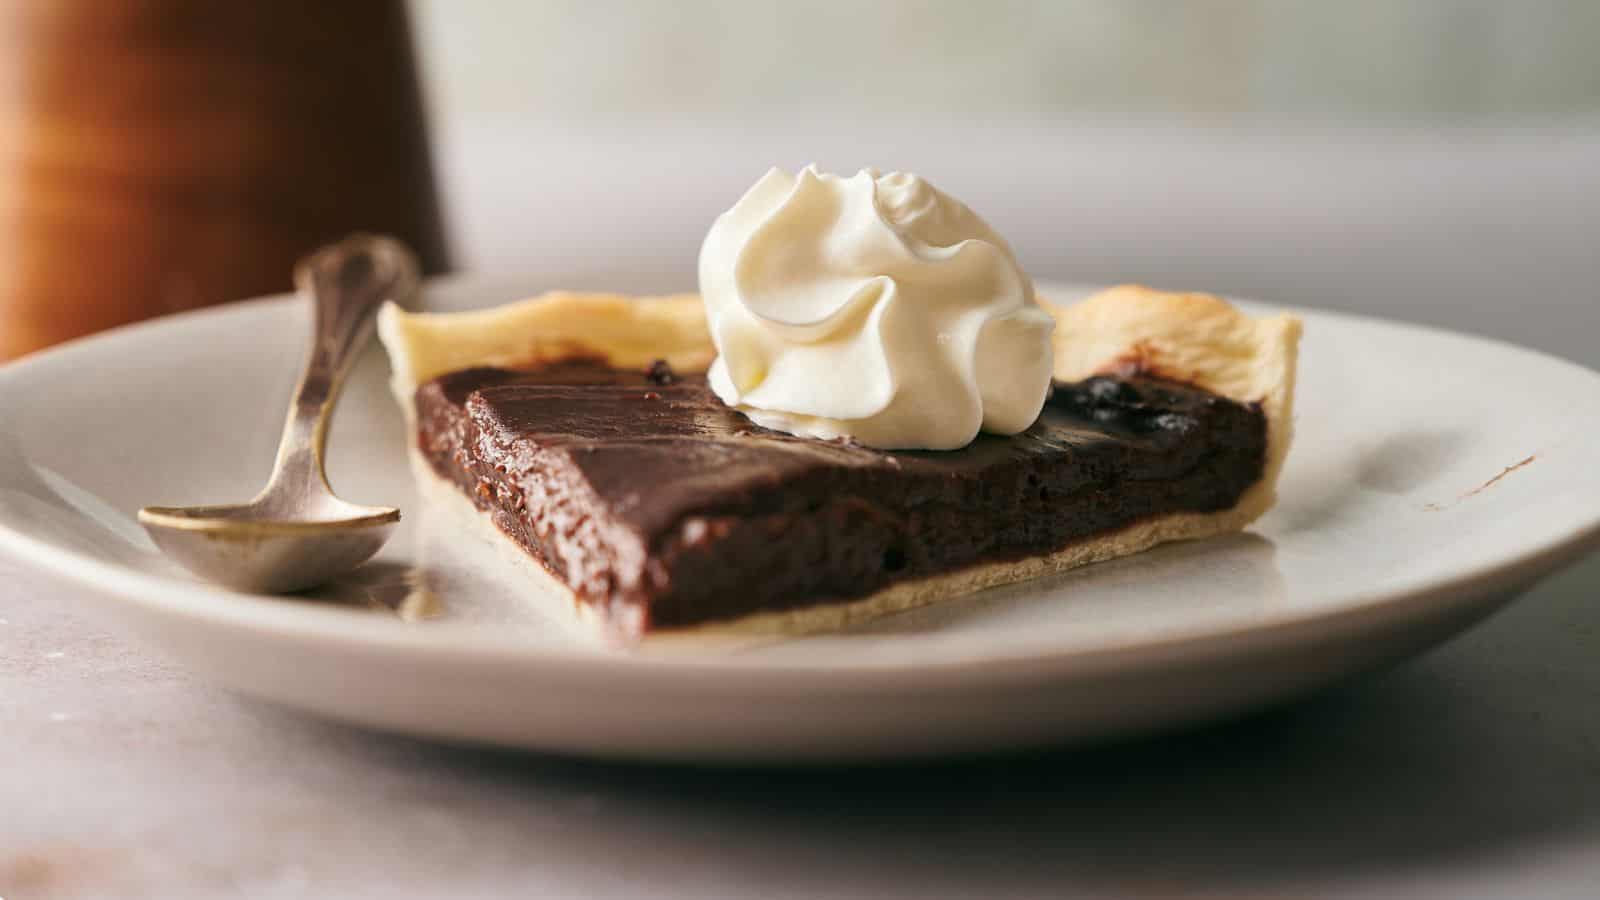 A slice of chocolate pie with a swirl of whipped cream.